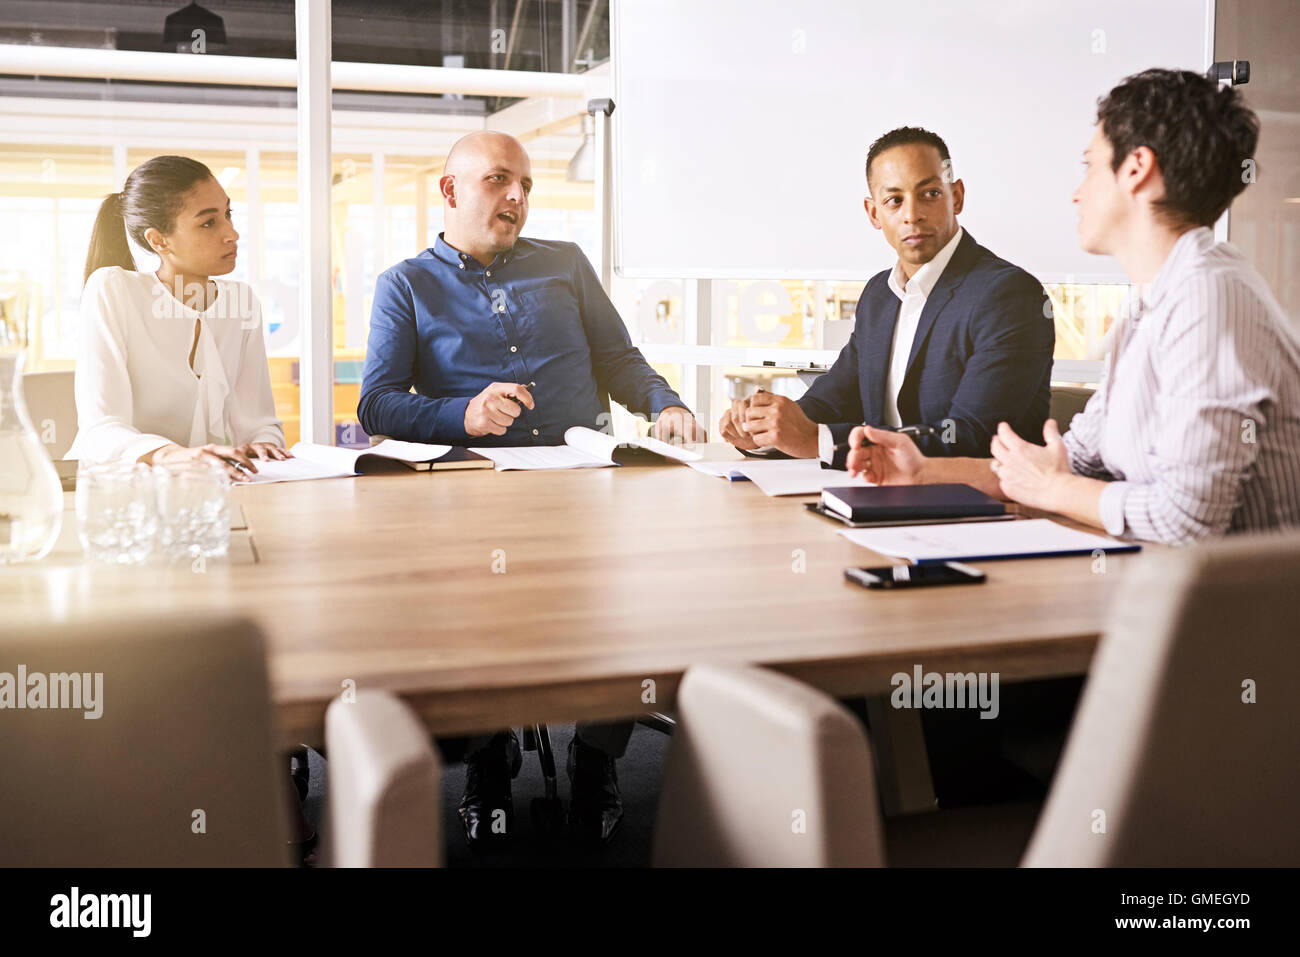 Business meeting between four high power, racially diverse, eclectic individuals Stock Photo